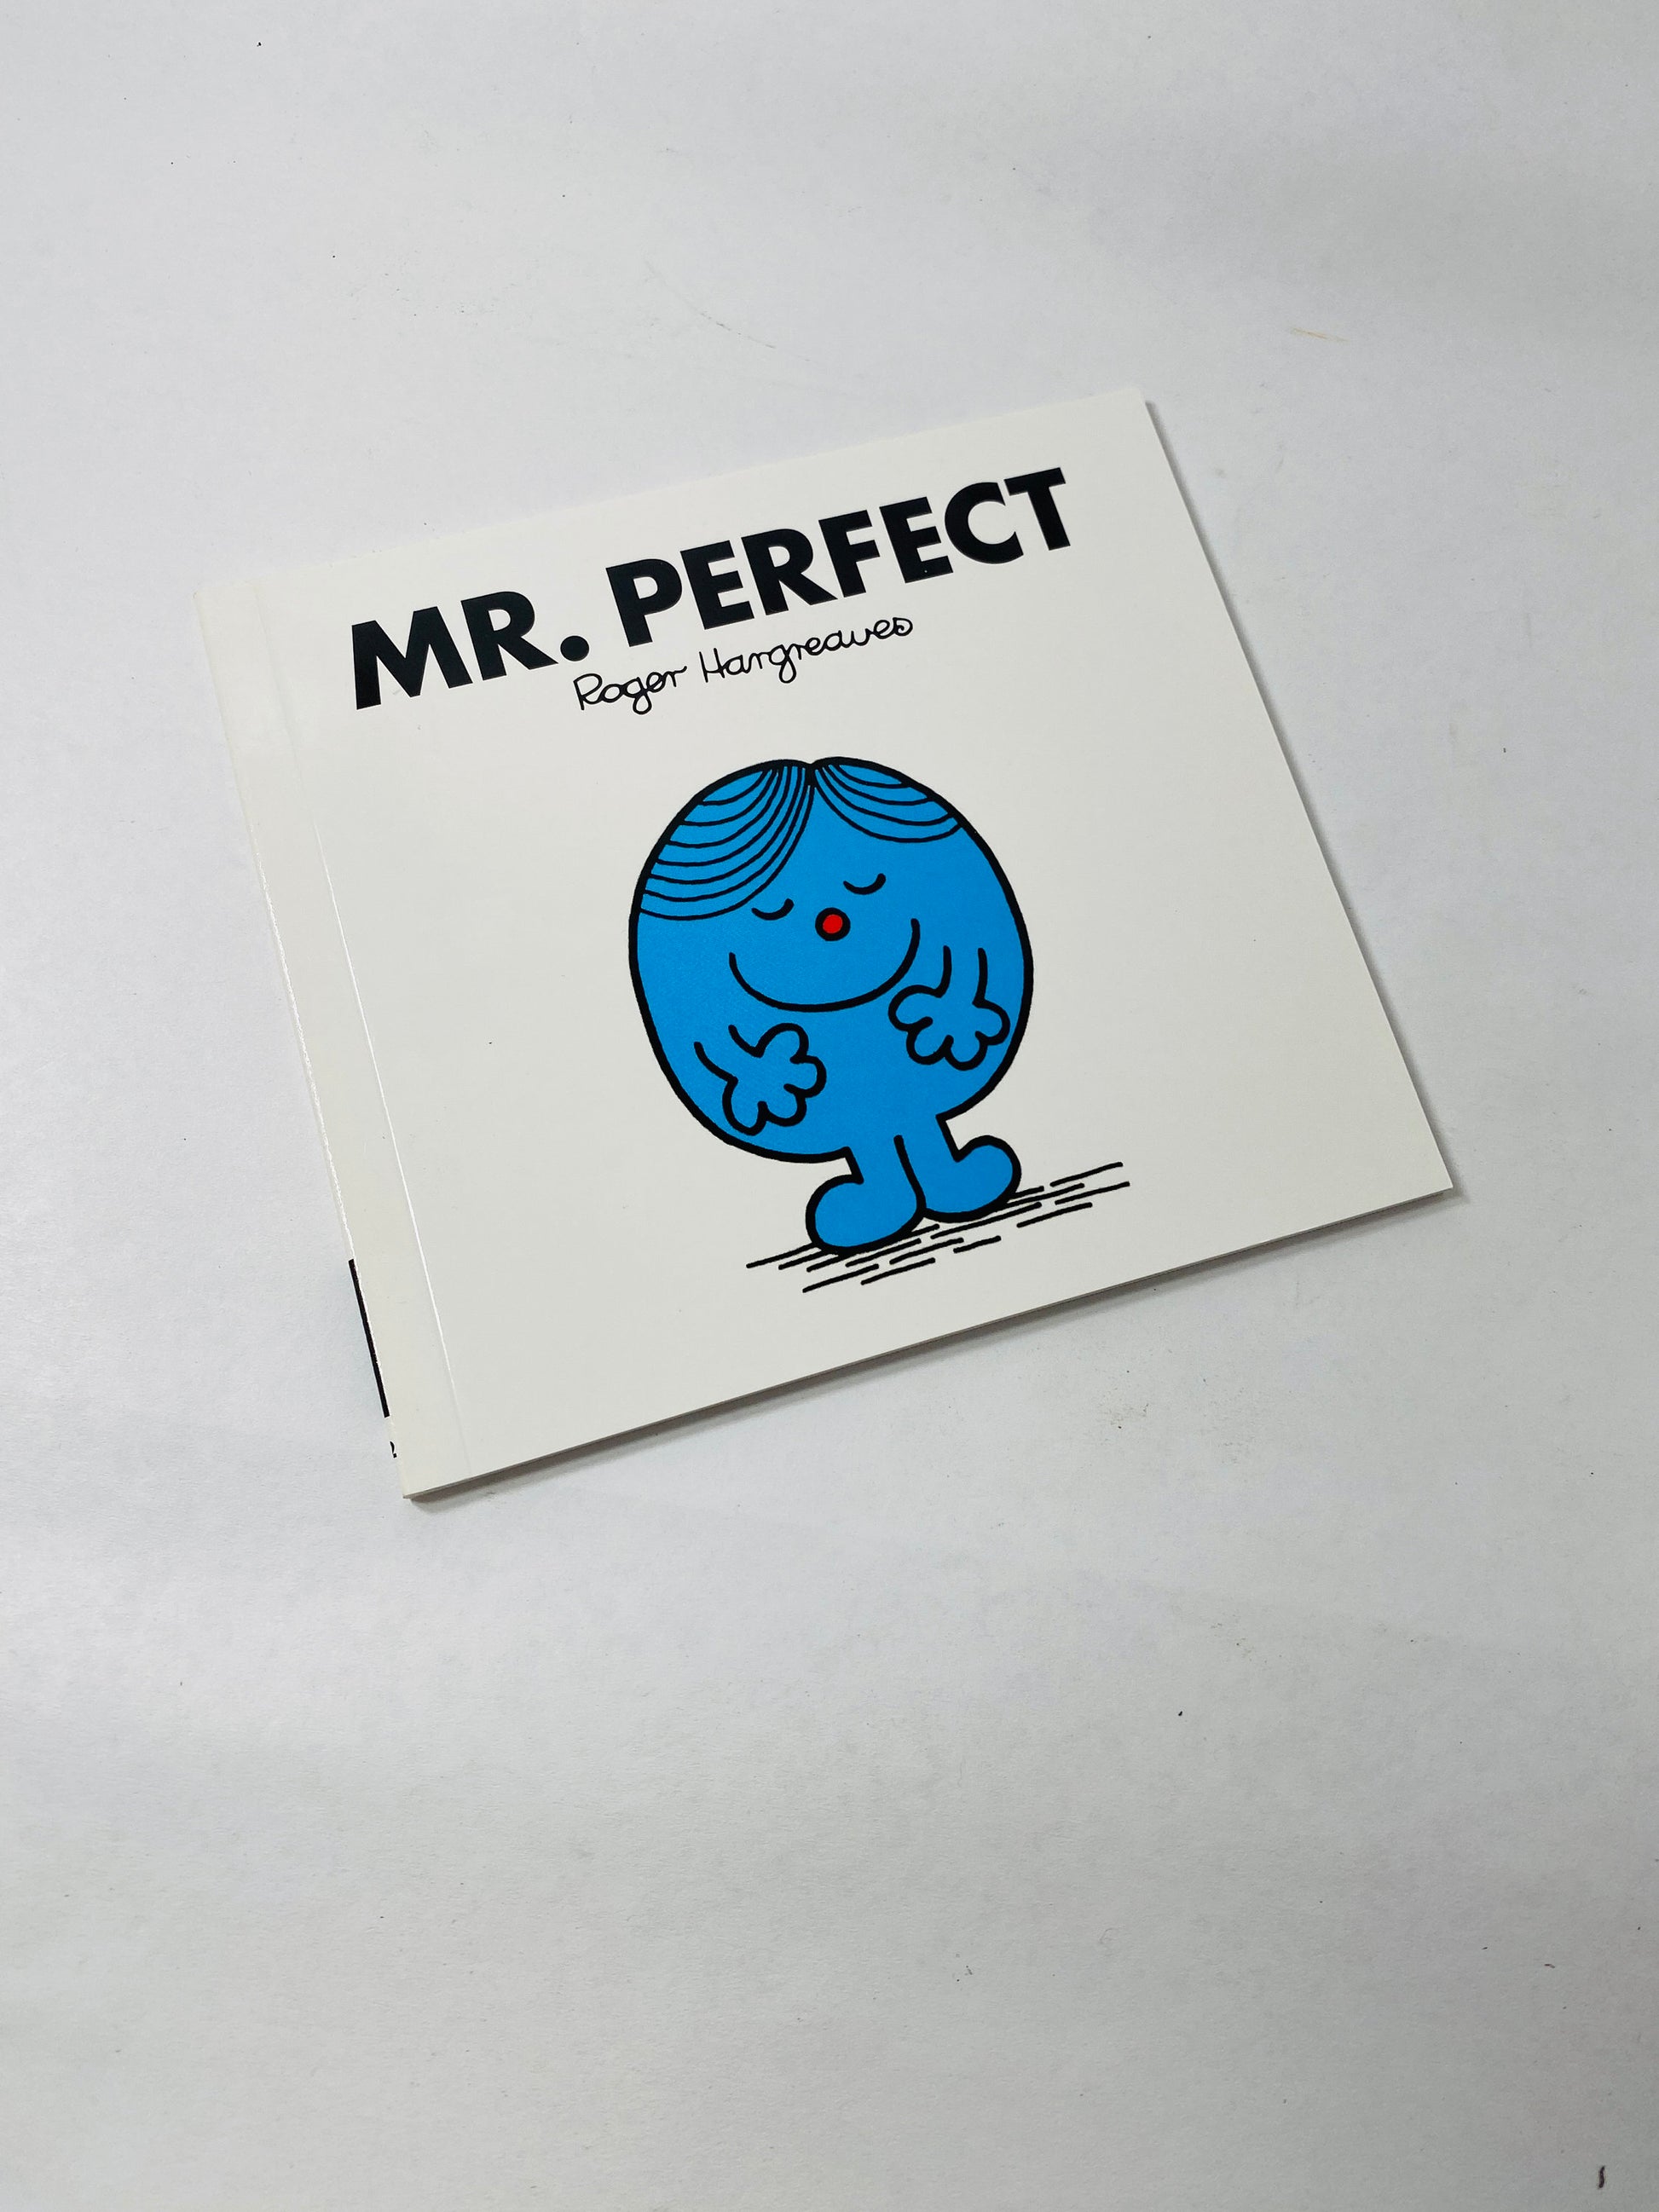 Mr. Lazy Mr Men vintage paperback books by Roger Hargreaves circa 1990 Children's books. Christmas stocking stuffer Cheerful Perfect Brave